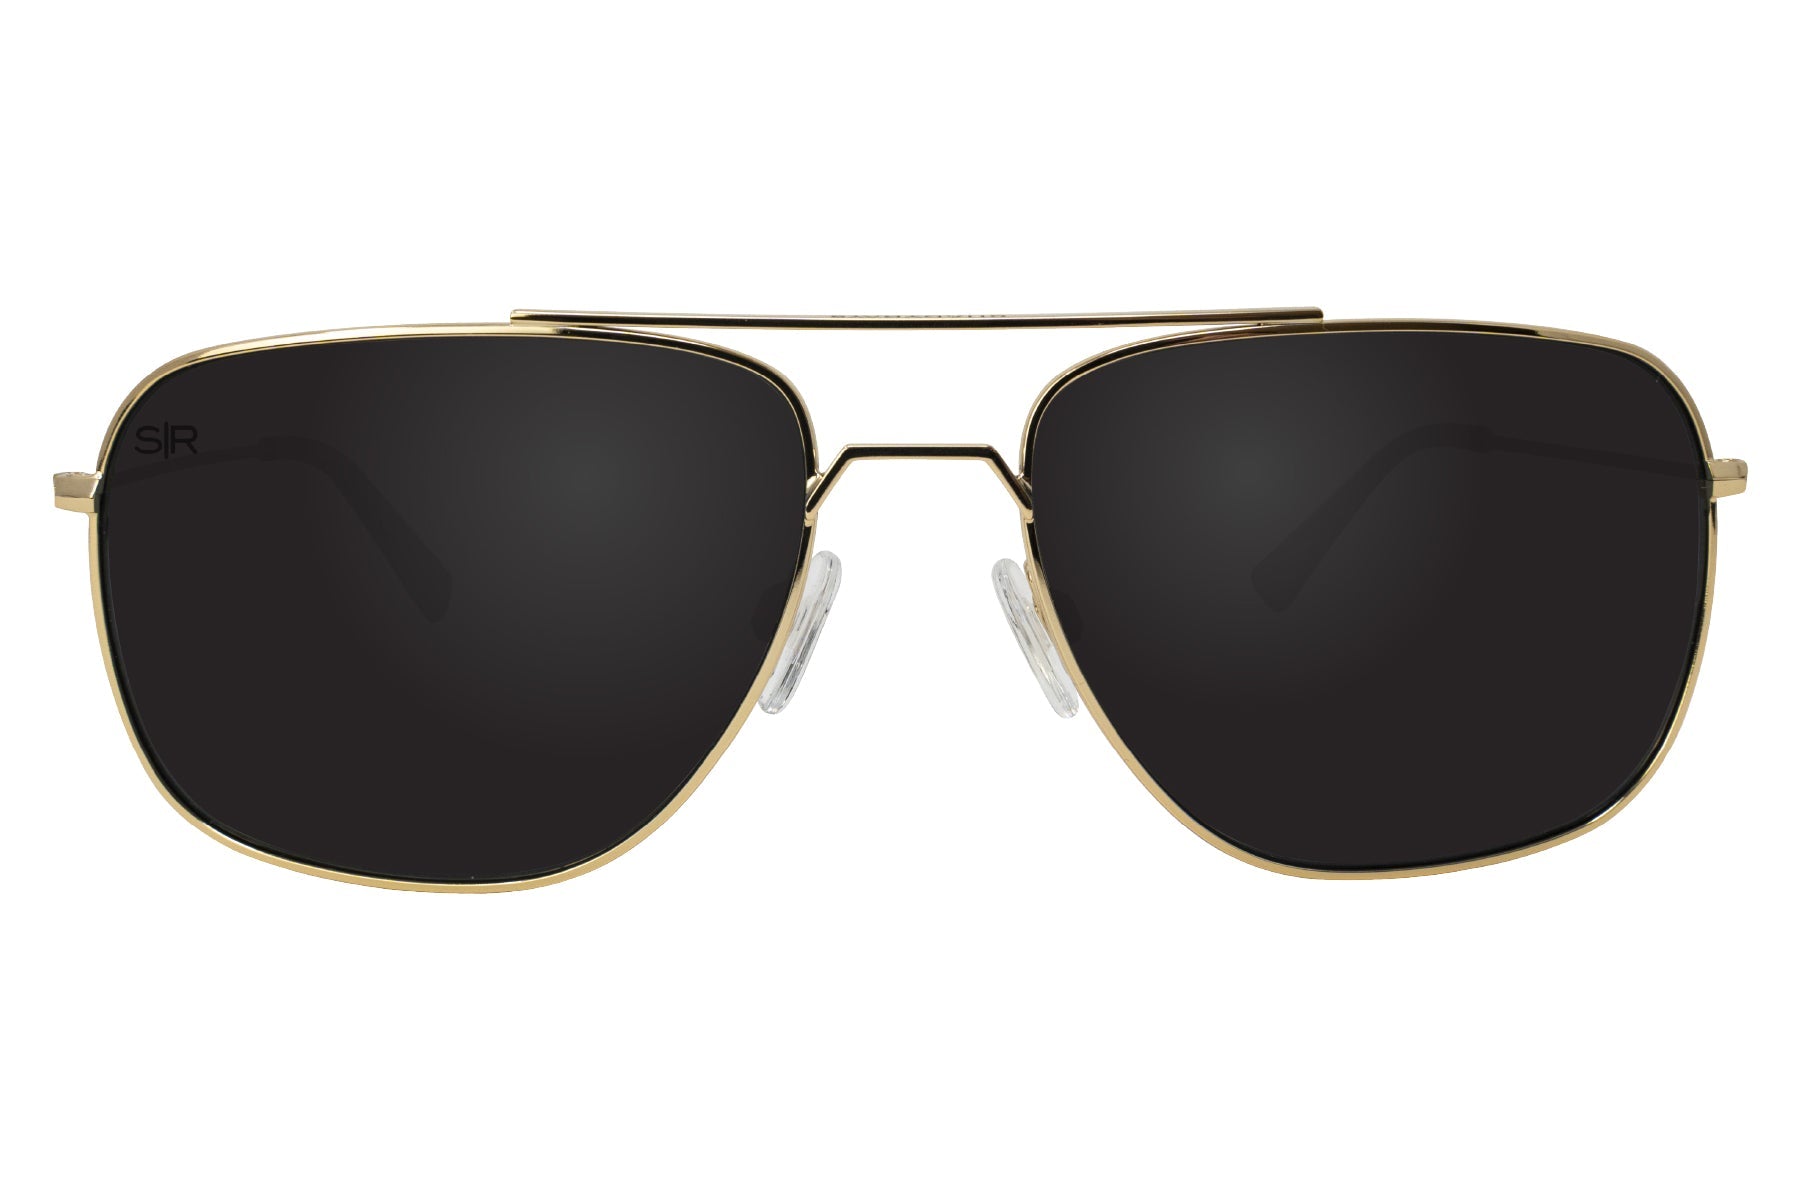 Navigator - Black Gold Polarized Sunglasses | Gold Men's Sunglasses | Christmas Gifts for Boyfriend | Gifts for Him | Unique Gifts for Husband | Shady